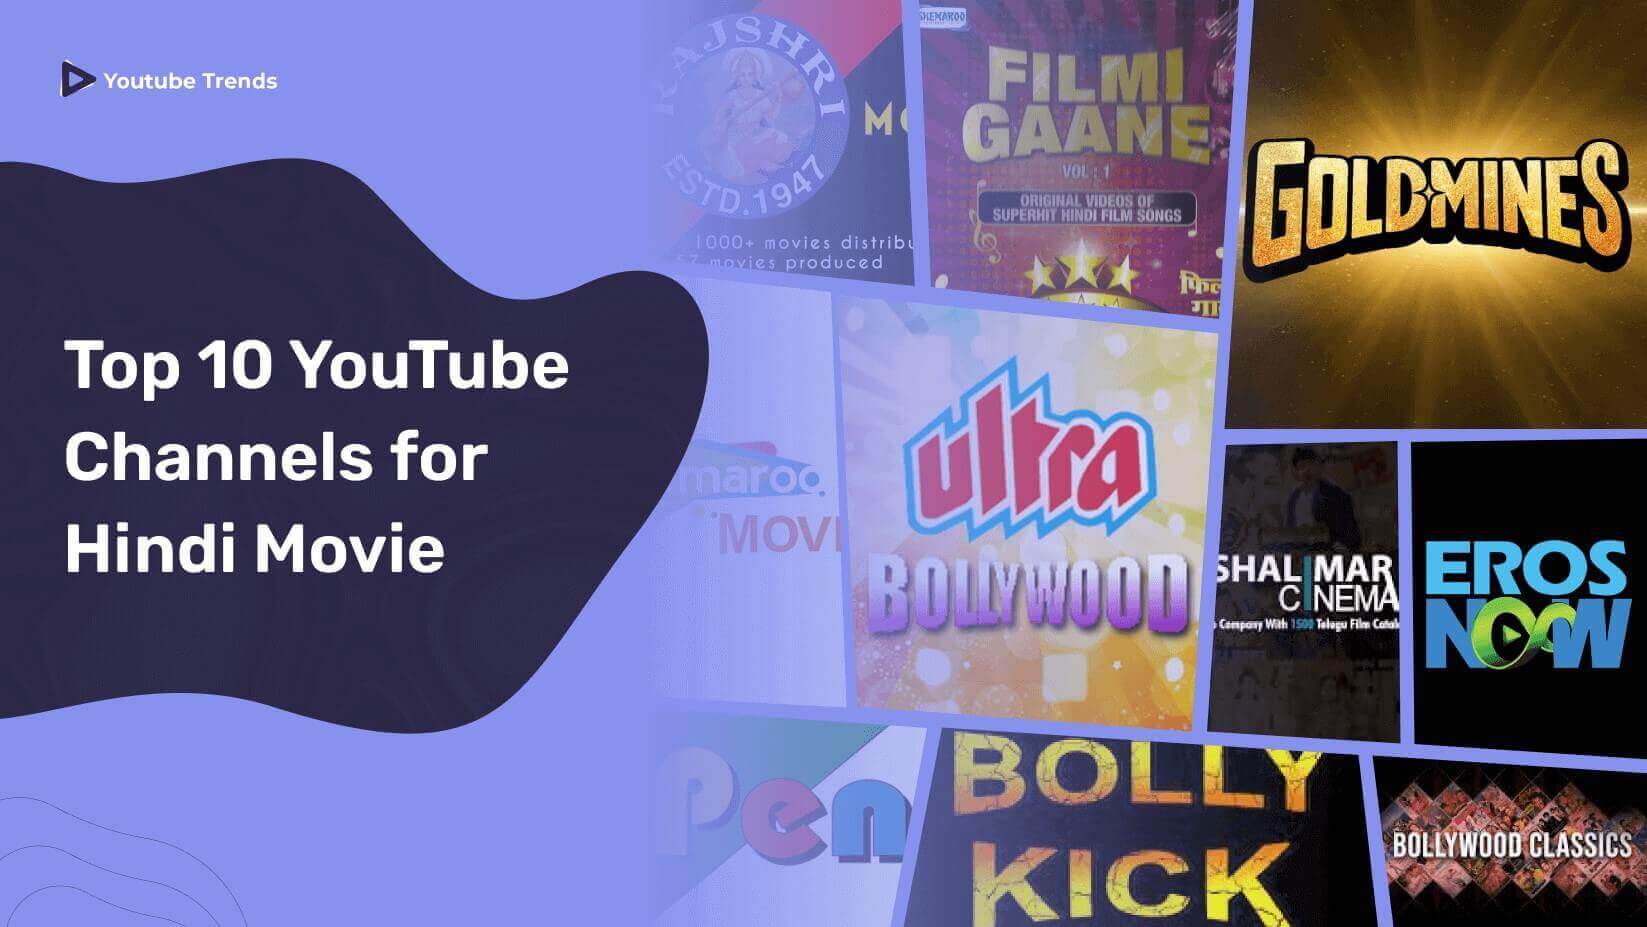 Top 10 YouTube Channels for Hindi Movie You Must Follow